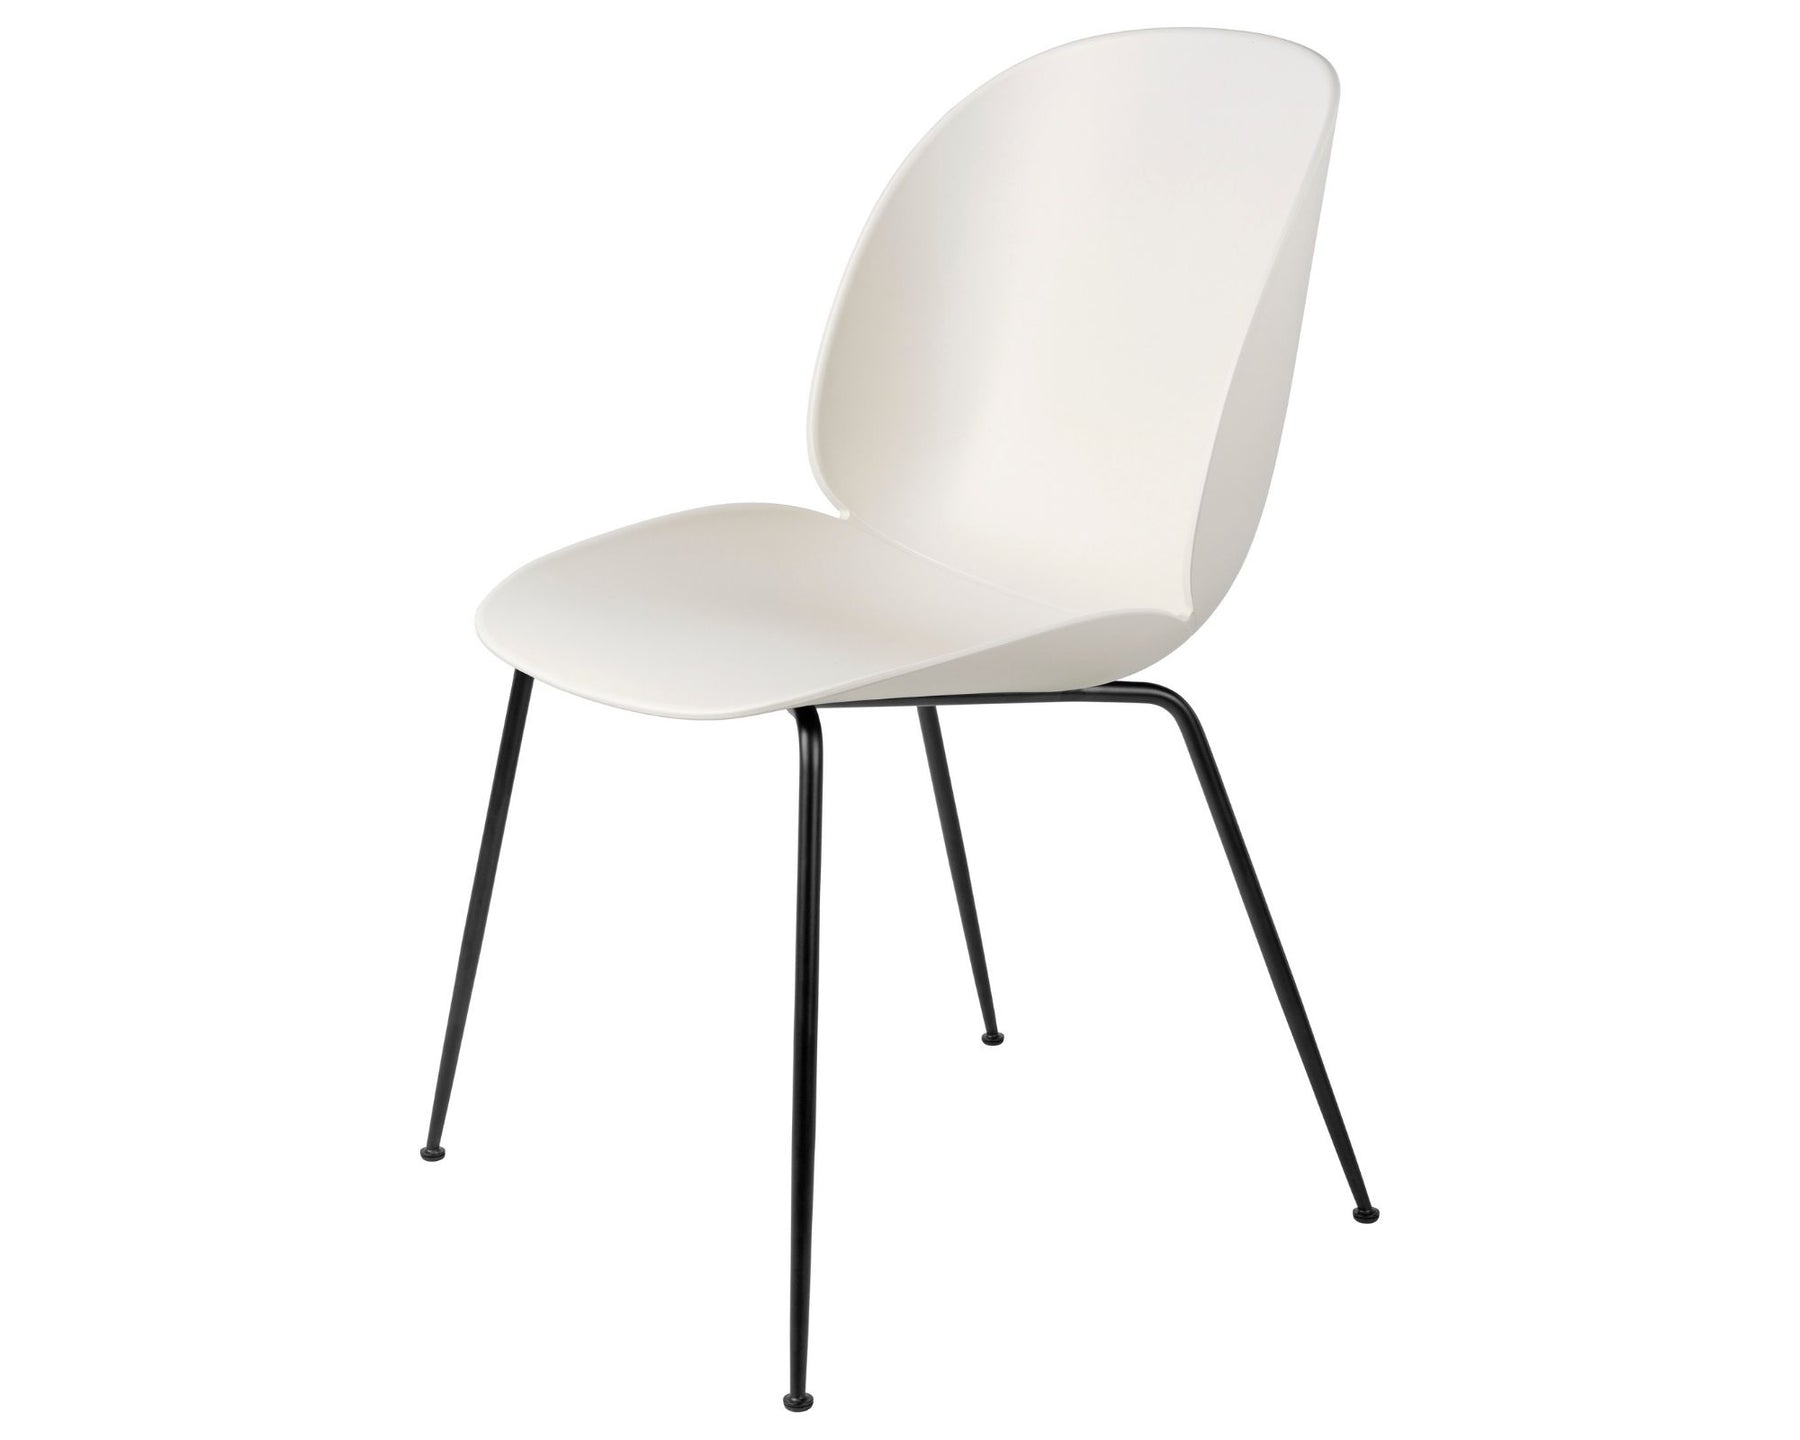 Alabaster White Dining Chair with Black Base | DSHOP